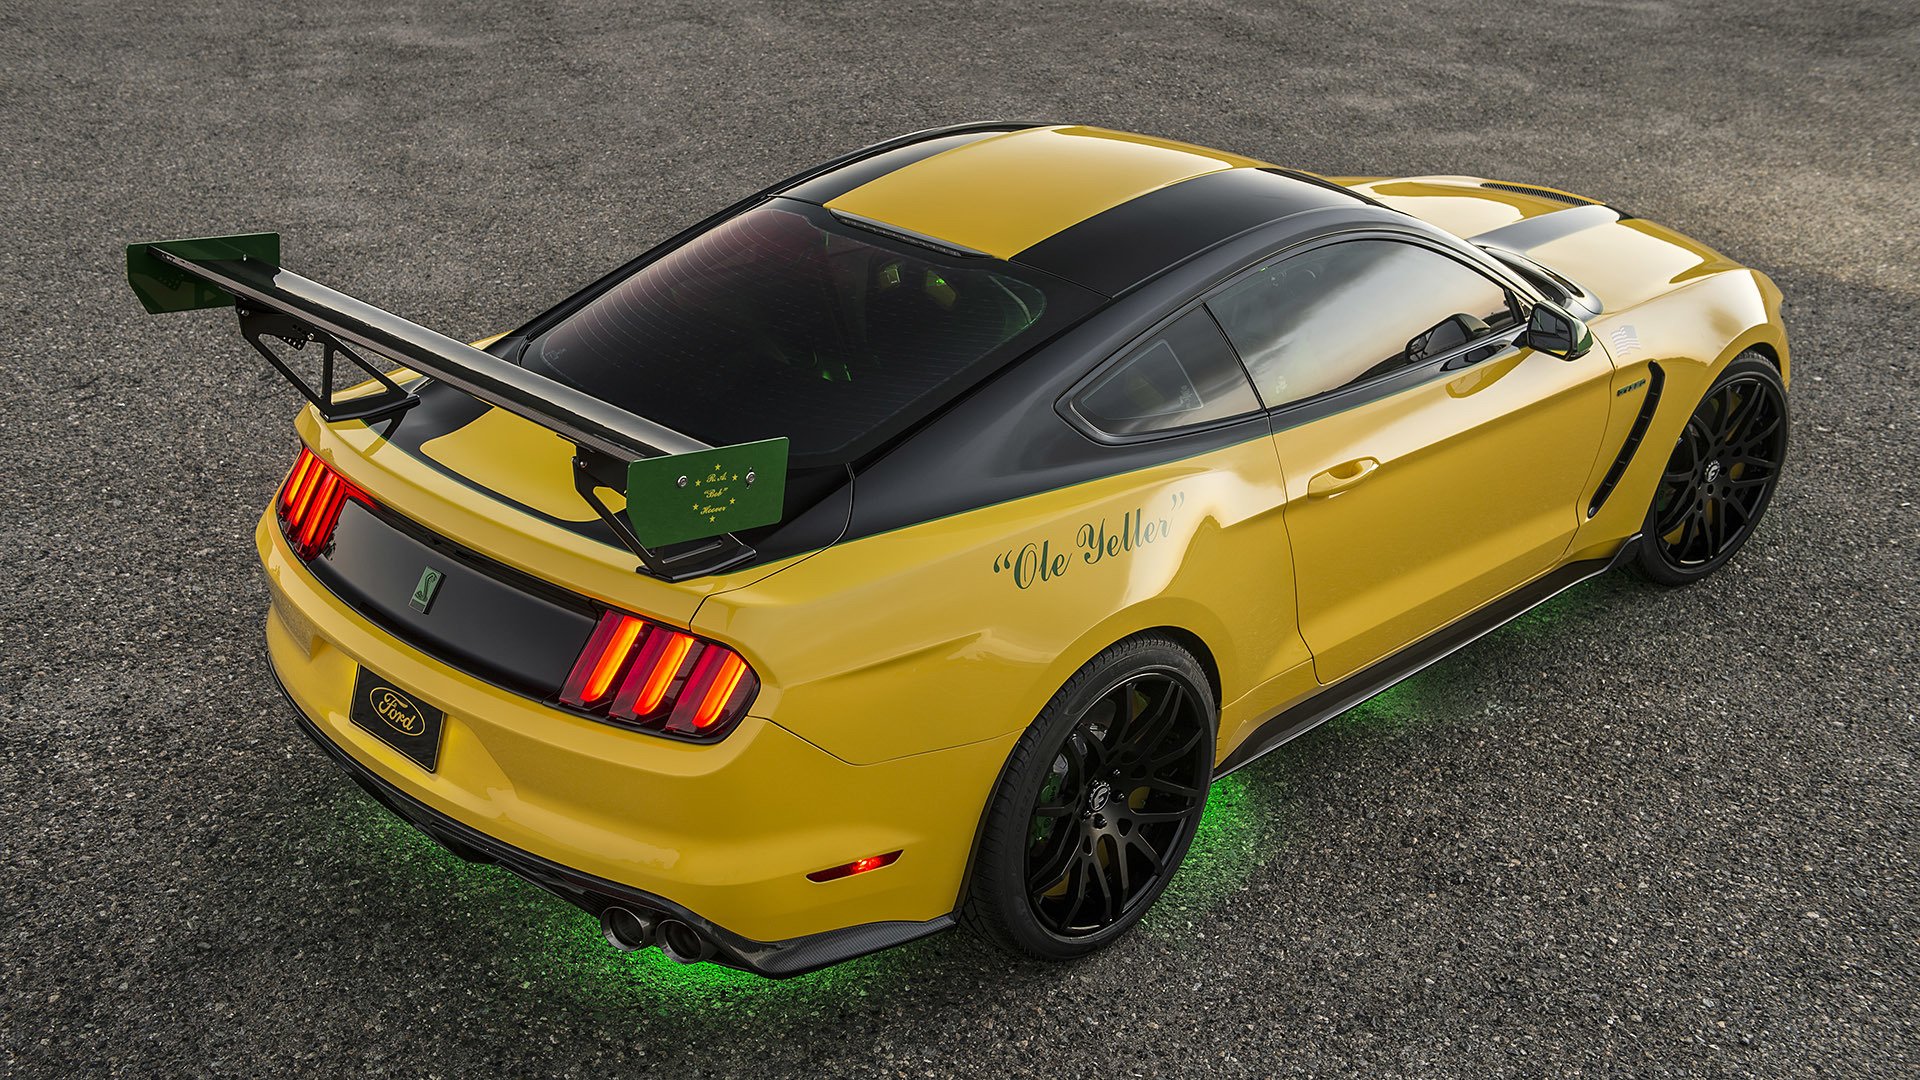 ford, Shellby, Gt 350, Builds, Wild, P 51, Inspired, Mustang, Cars, Yellow, 201 Wallpaper